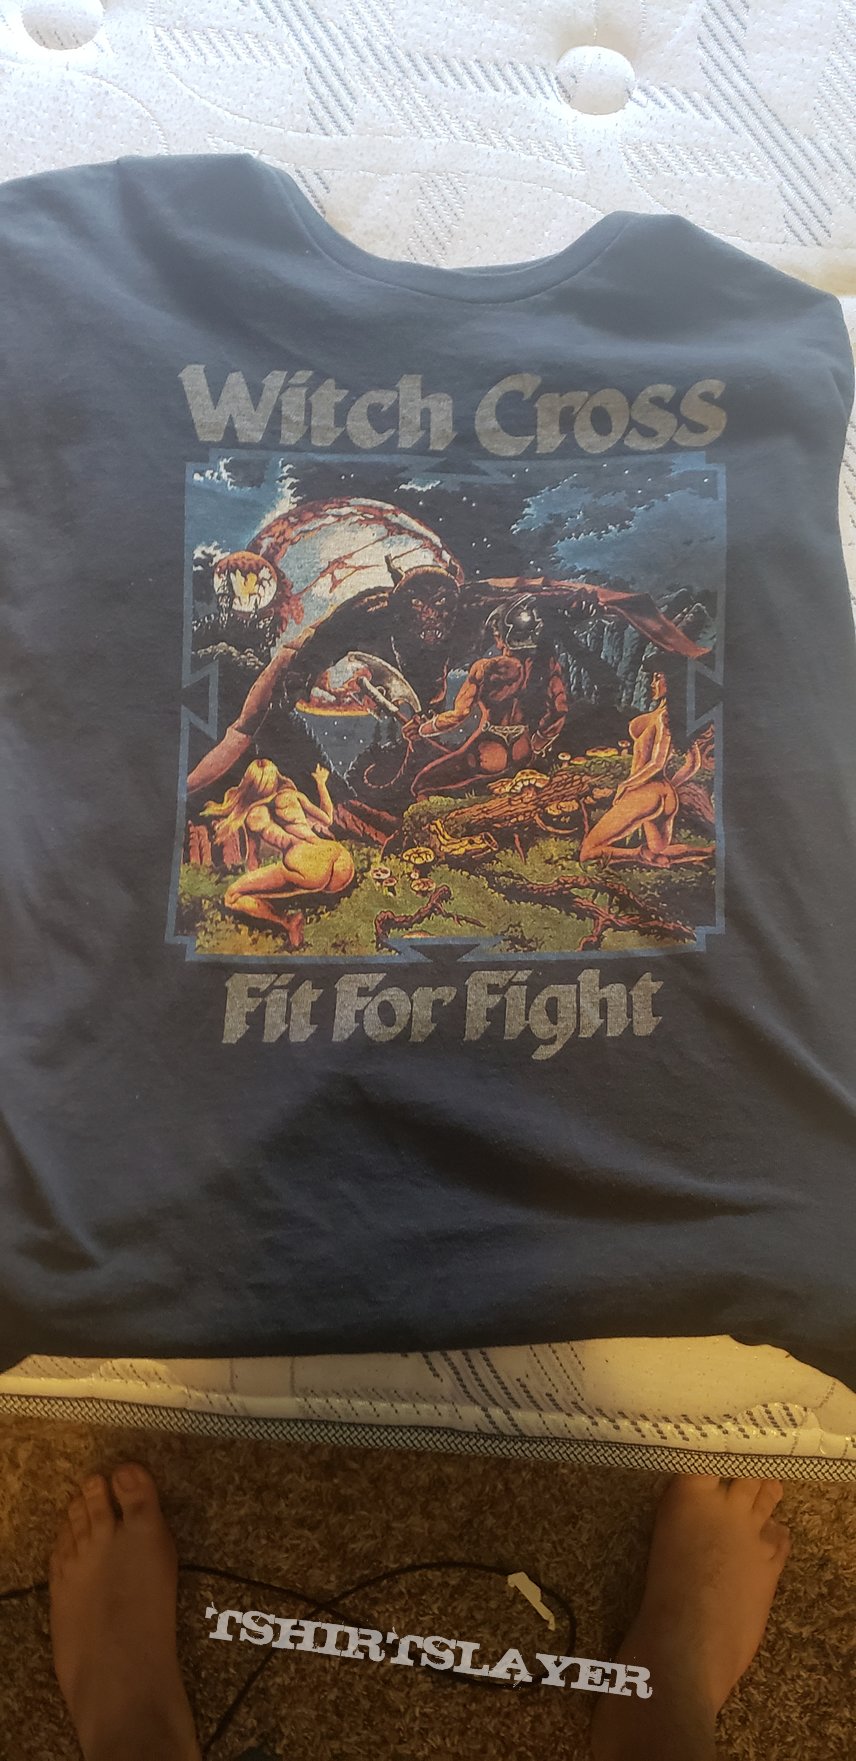 Witch cross fit for fight  t shirt